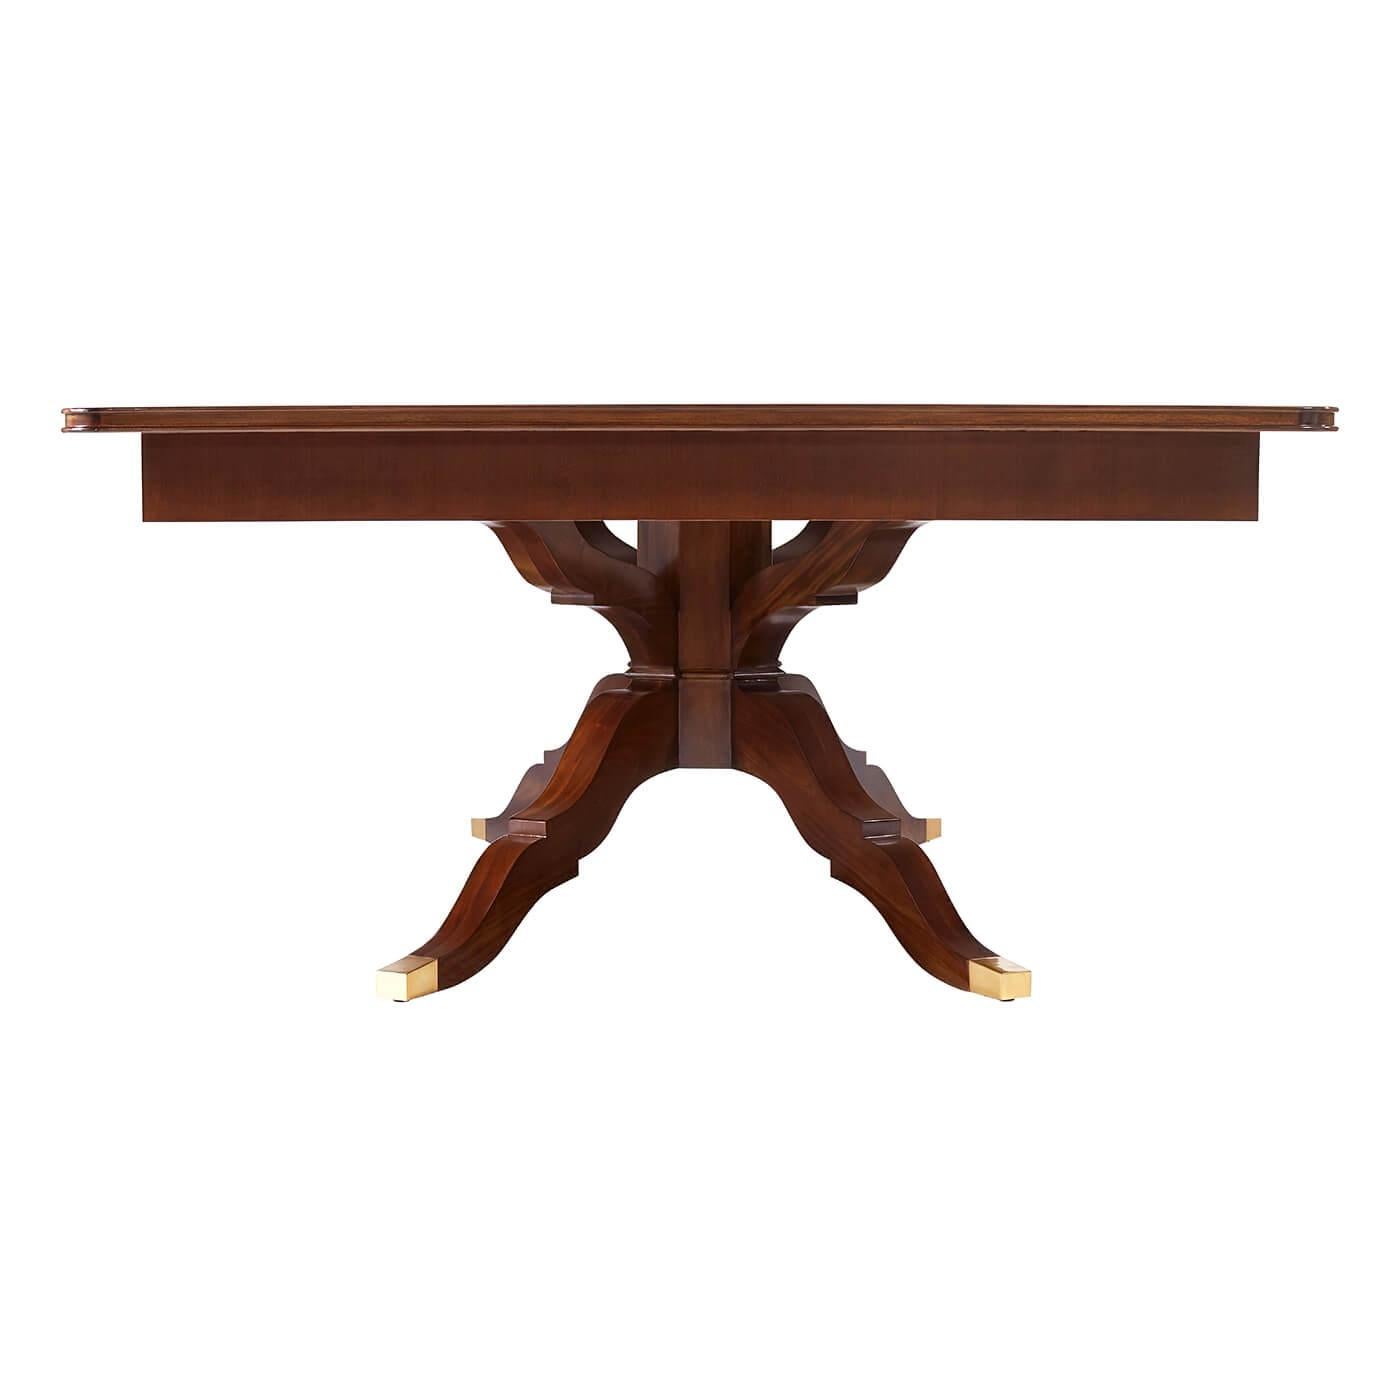 Contemporary Midcentury Style Extension Dining Table